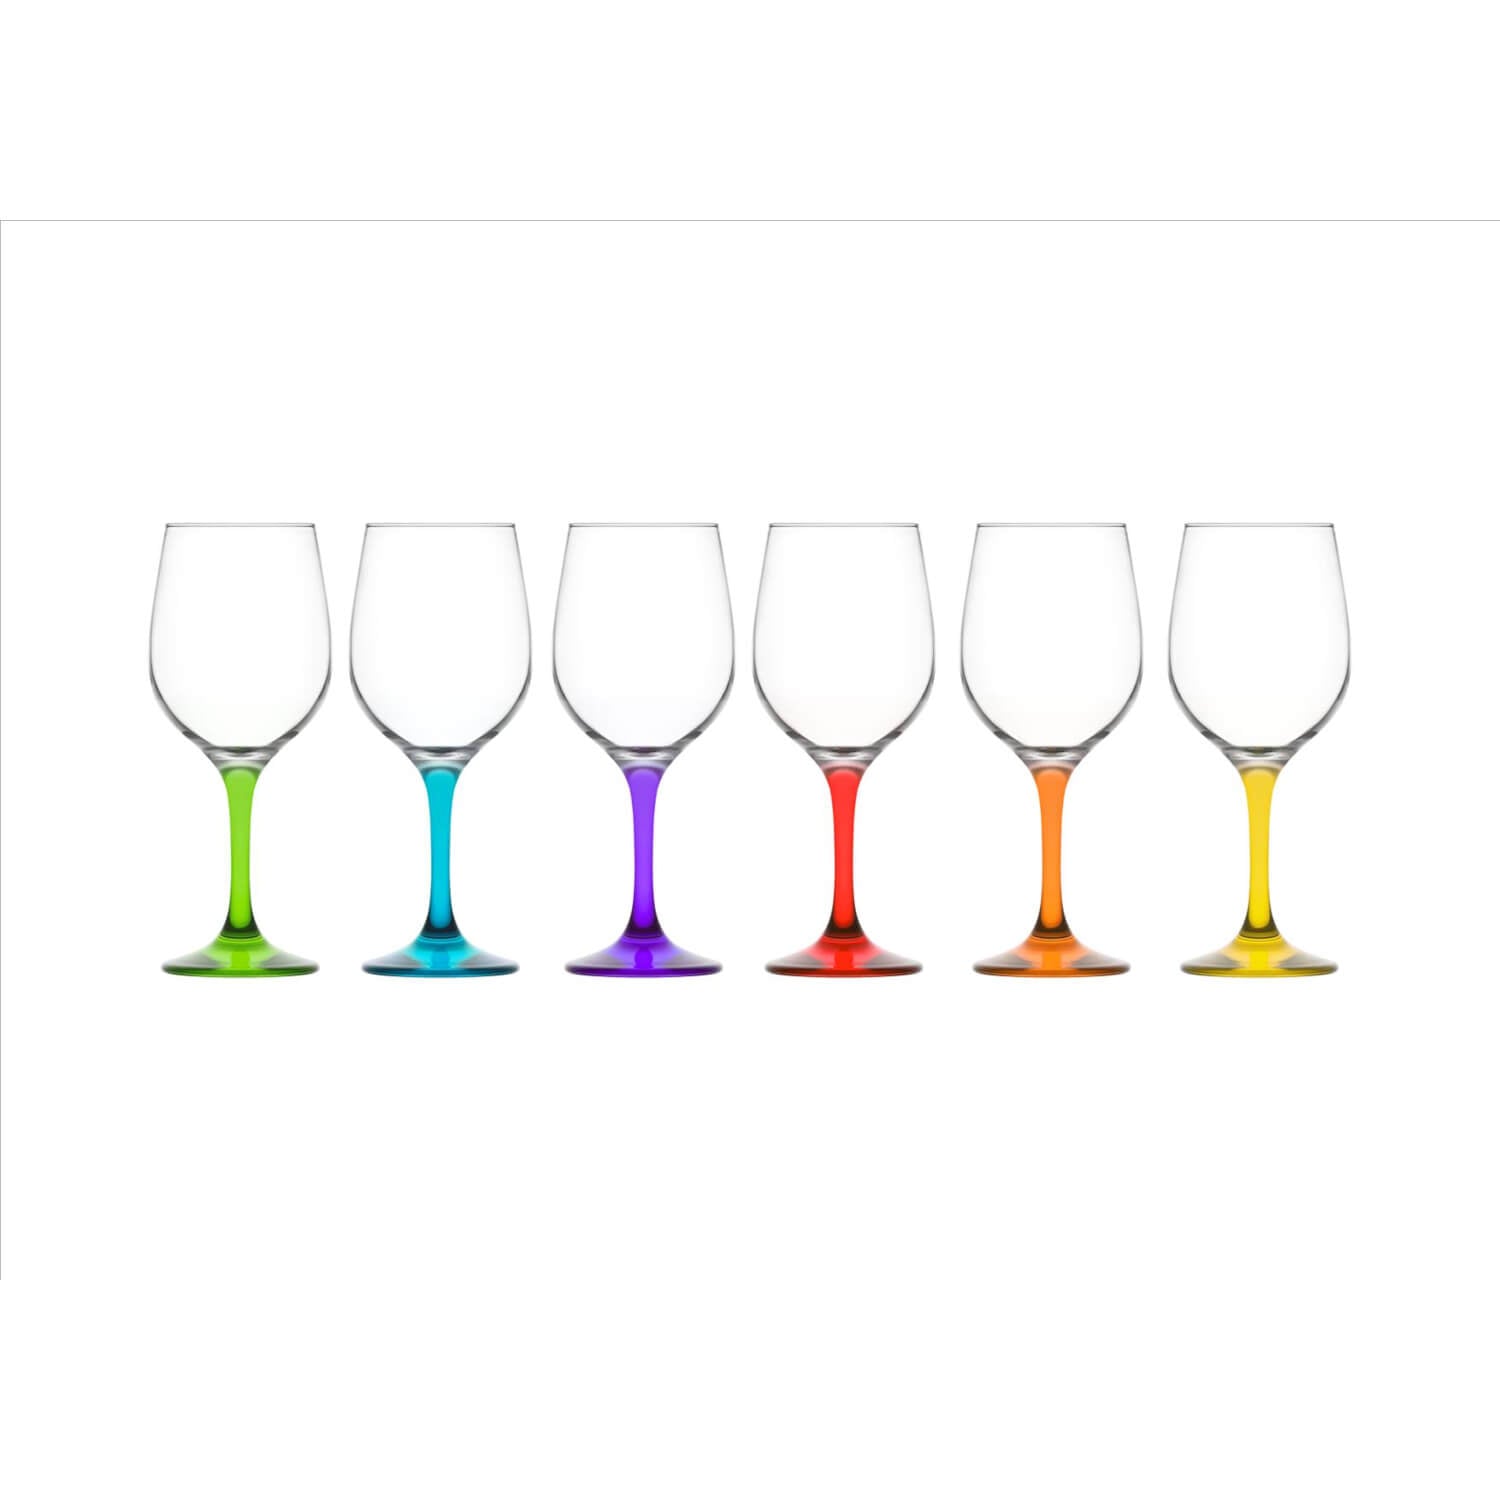 Killarney Crystal Jewel Collection - Set of 6 Wine Glasses 1 Shaws Department Stores